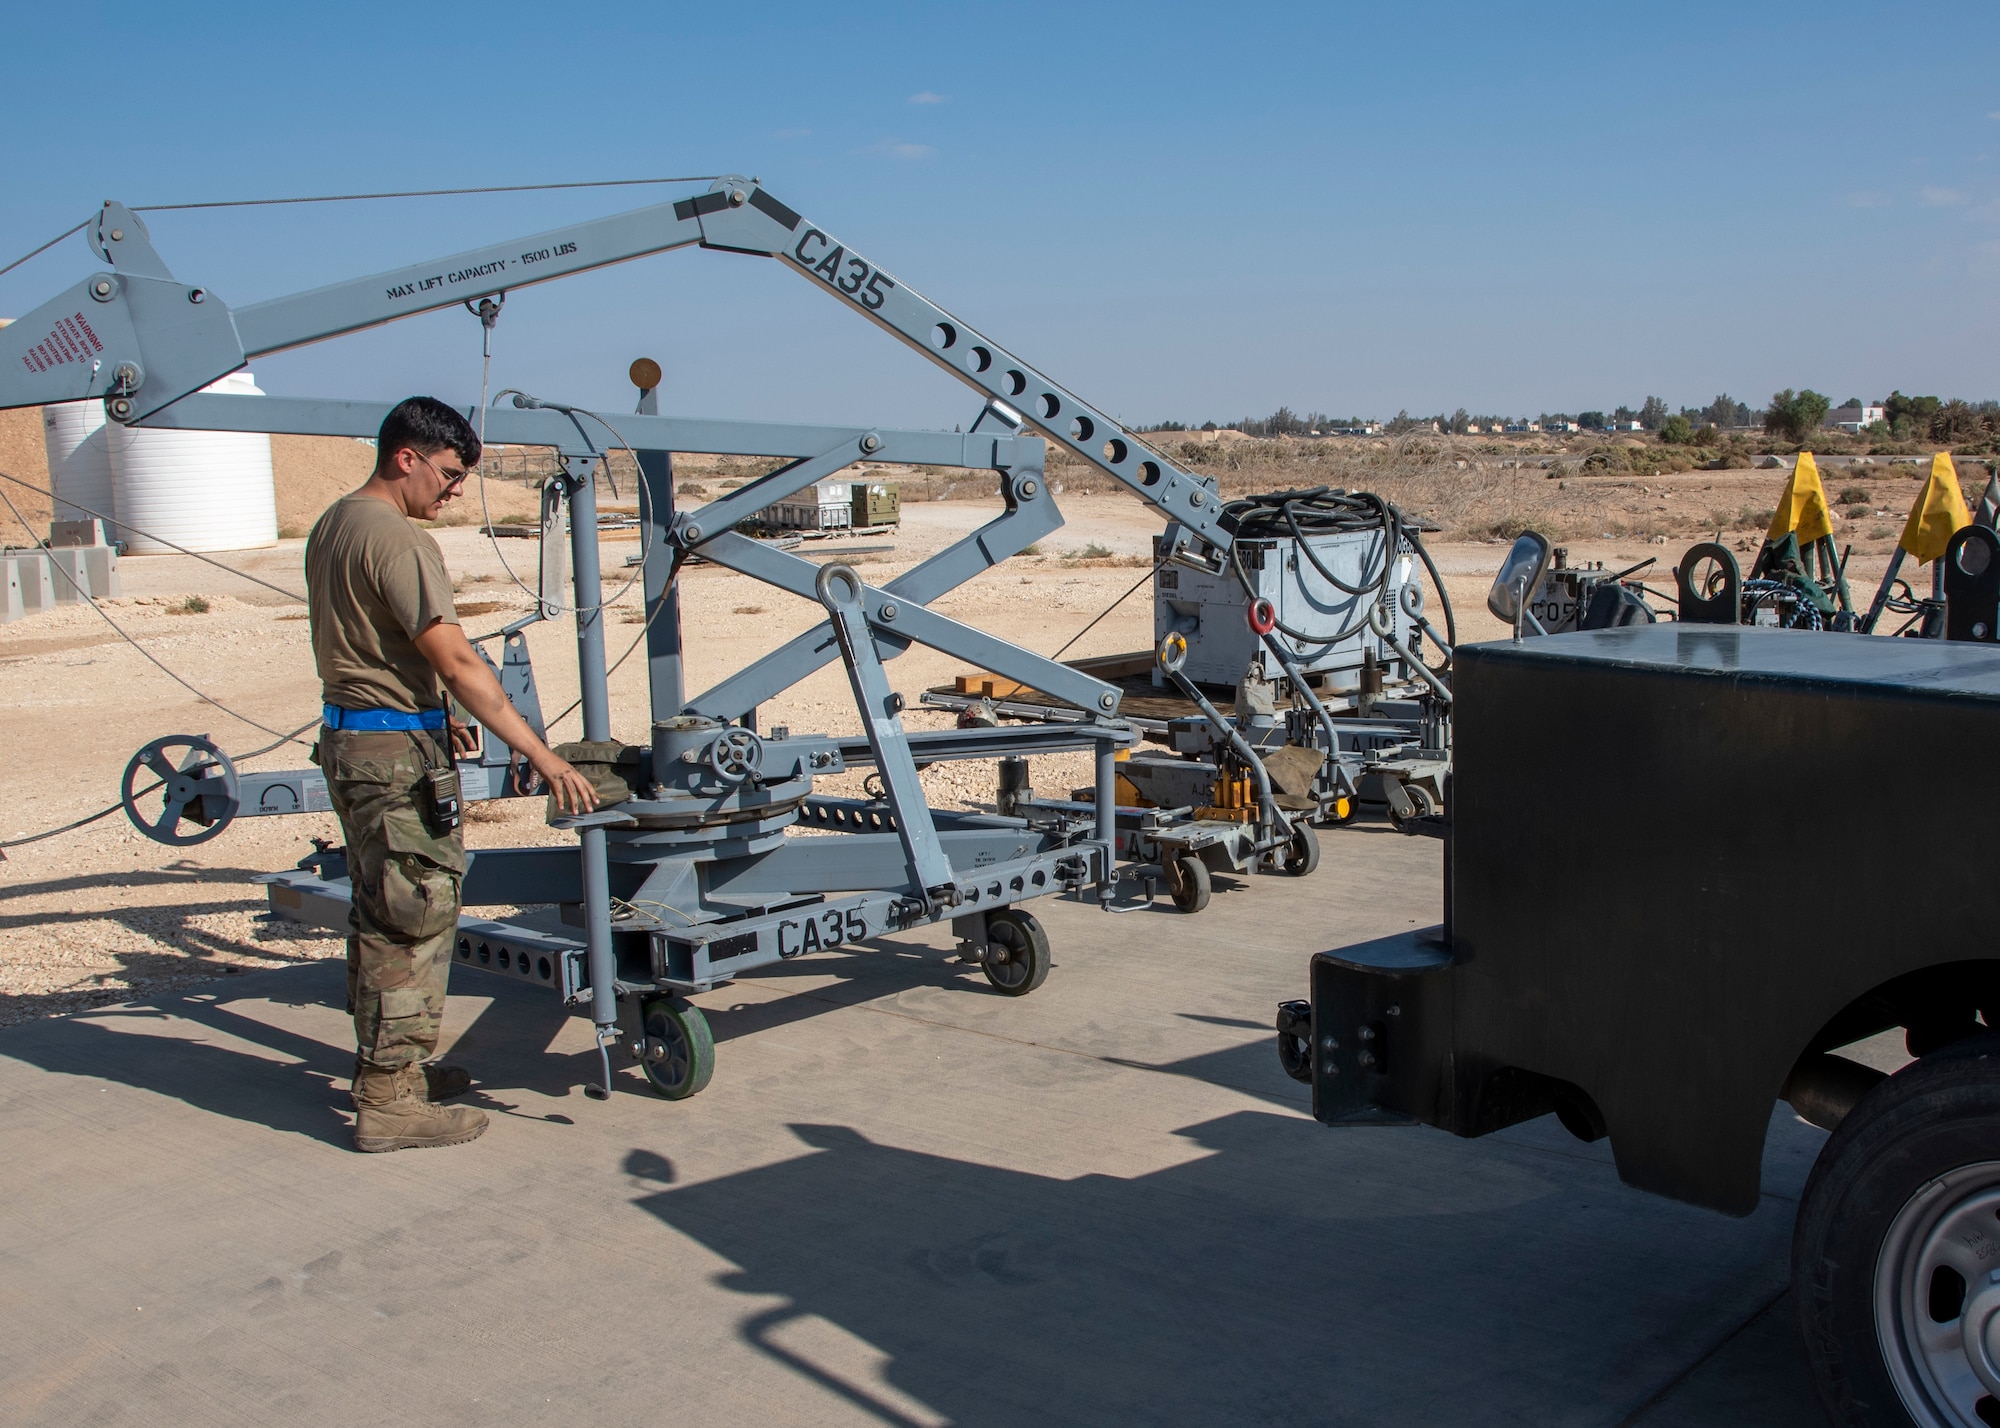 Senior Airman Jacob Karn, an Aerospace Ground Equipment Mechanic with the 332d Expeditionary Maintenance Squadron, inspects a canopy crane at an undisclosed location, Southwest Asia, Nov. 11. These cranes are used to remove the canopy of an F-15E Fighting Falcon for repairs. (U.S. Air Force photo by: Tech. Sgt. Jim Bentley)